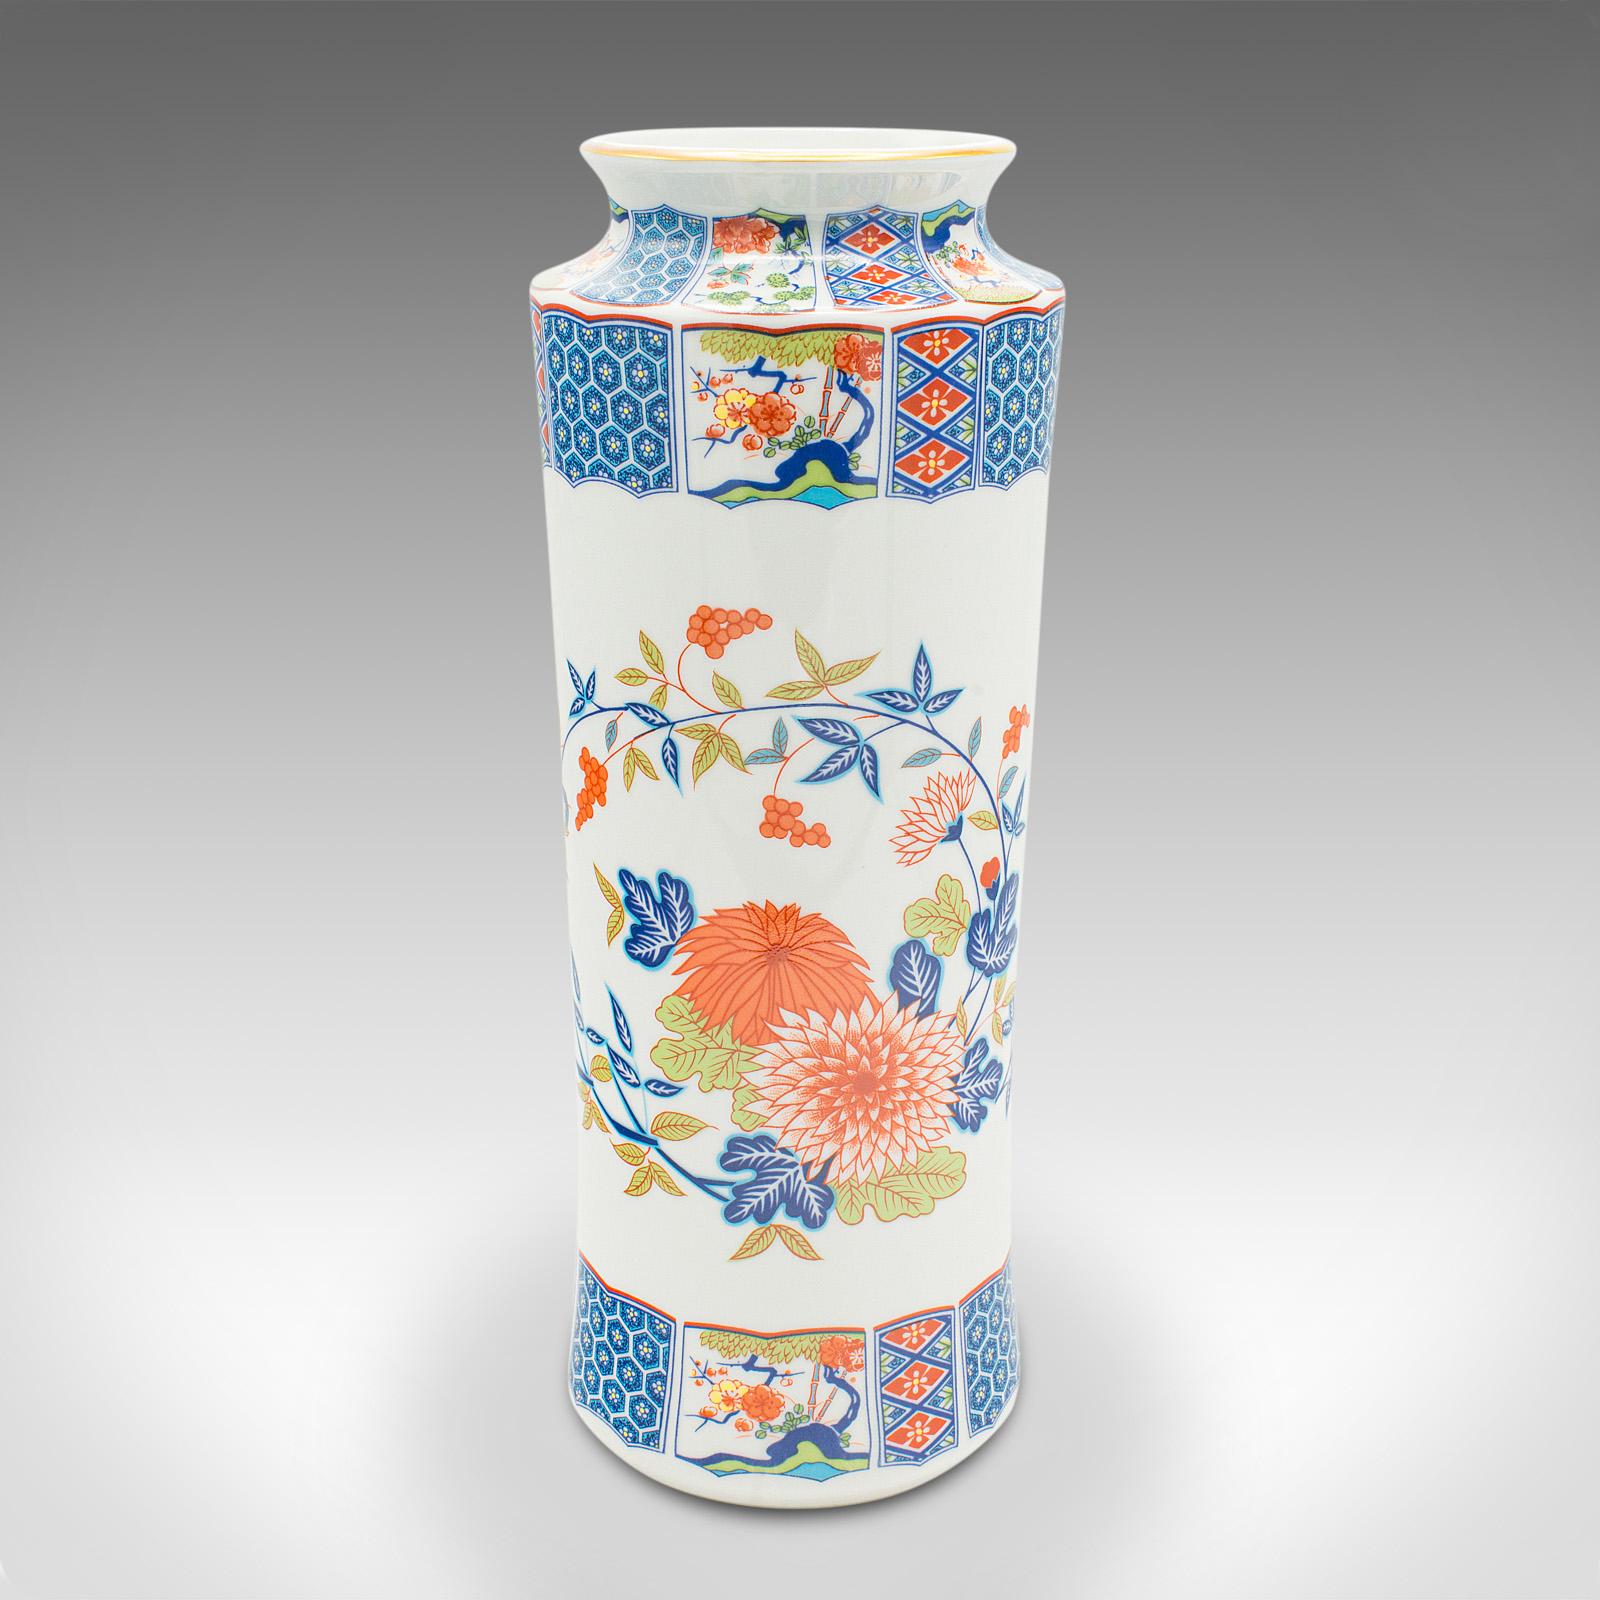 This is a vintage decorative stem vase. A Chinese, ceramic flower sleeve in Art Deco revival taste, dating to the late 20th century, circa 1980.

Presents beautifully with appealing decor and colour
Displaying a desirable aged patina and free of